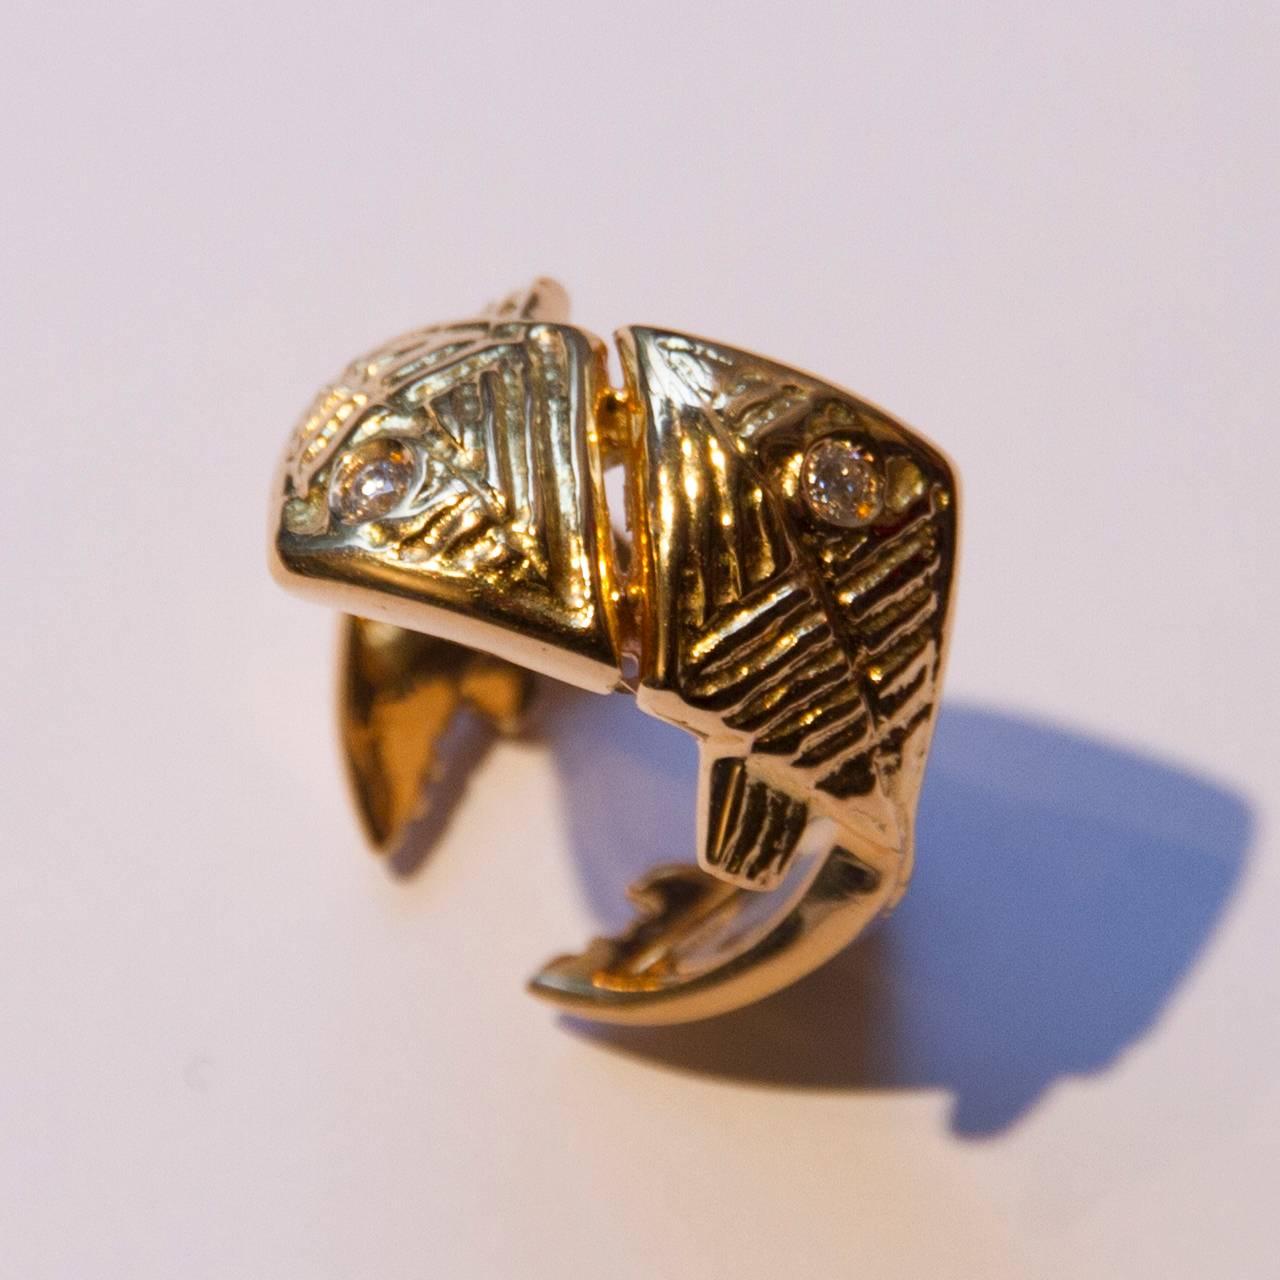 Very beautiful 18K Gold and roundcut briliants ring by Georges Braque (1882-1963), inventor of cubism.

This ring features the greeks oceanides as fishes.
It is signed "Bijoux de Braque" and numbered EA ("Epreuve d'artiste" for